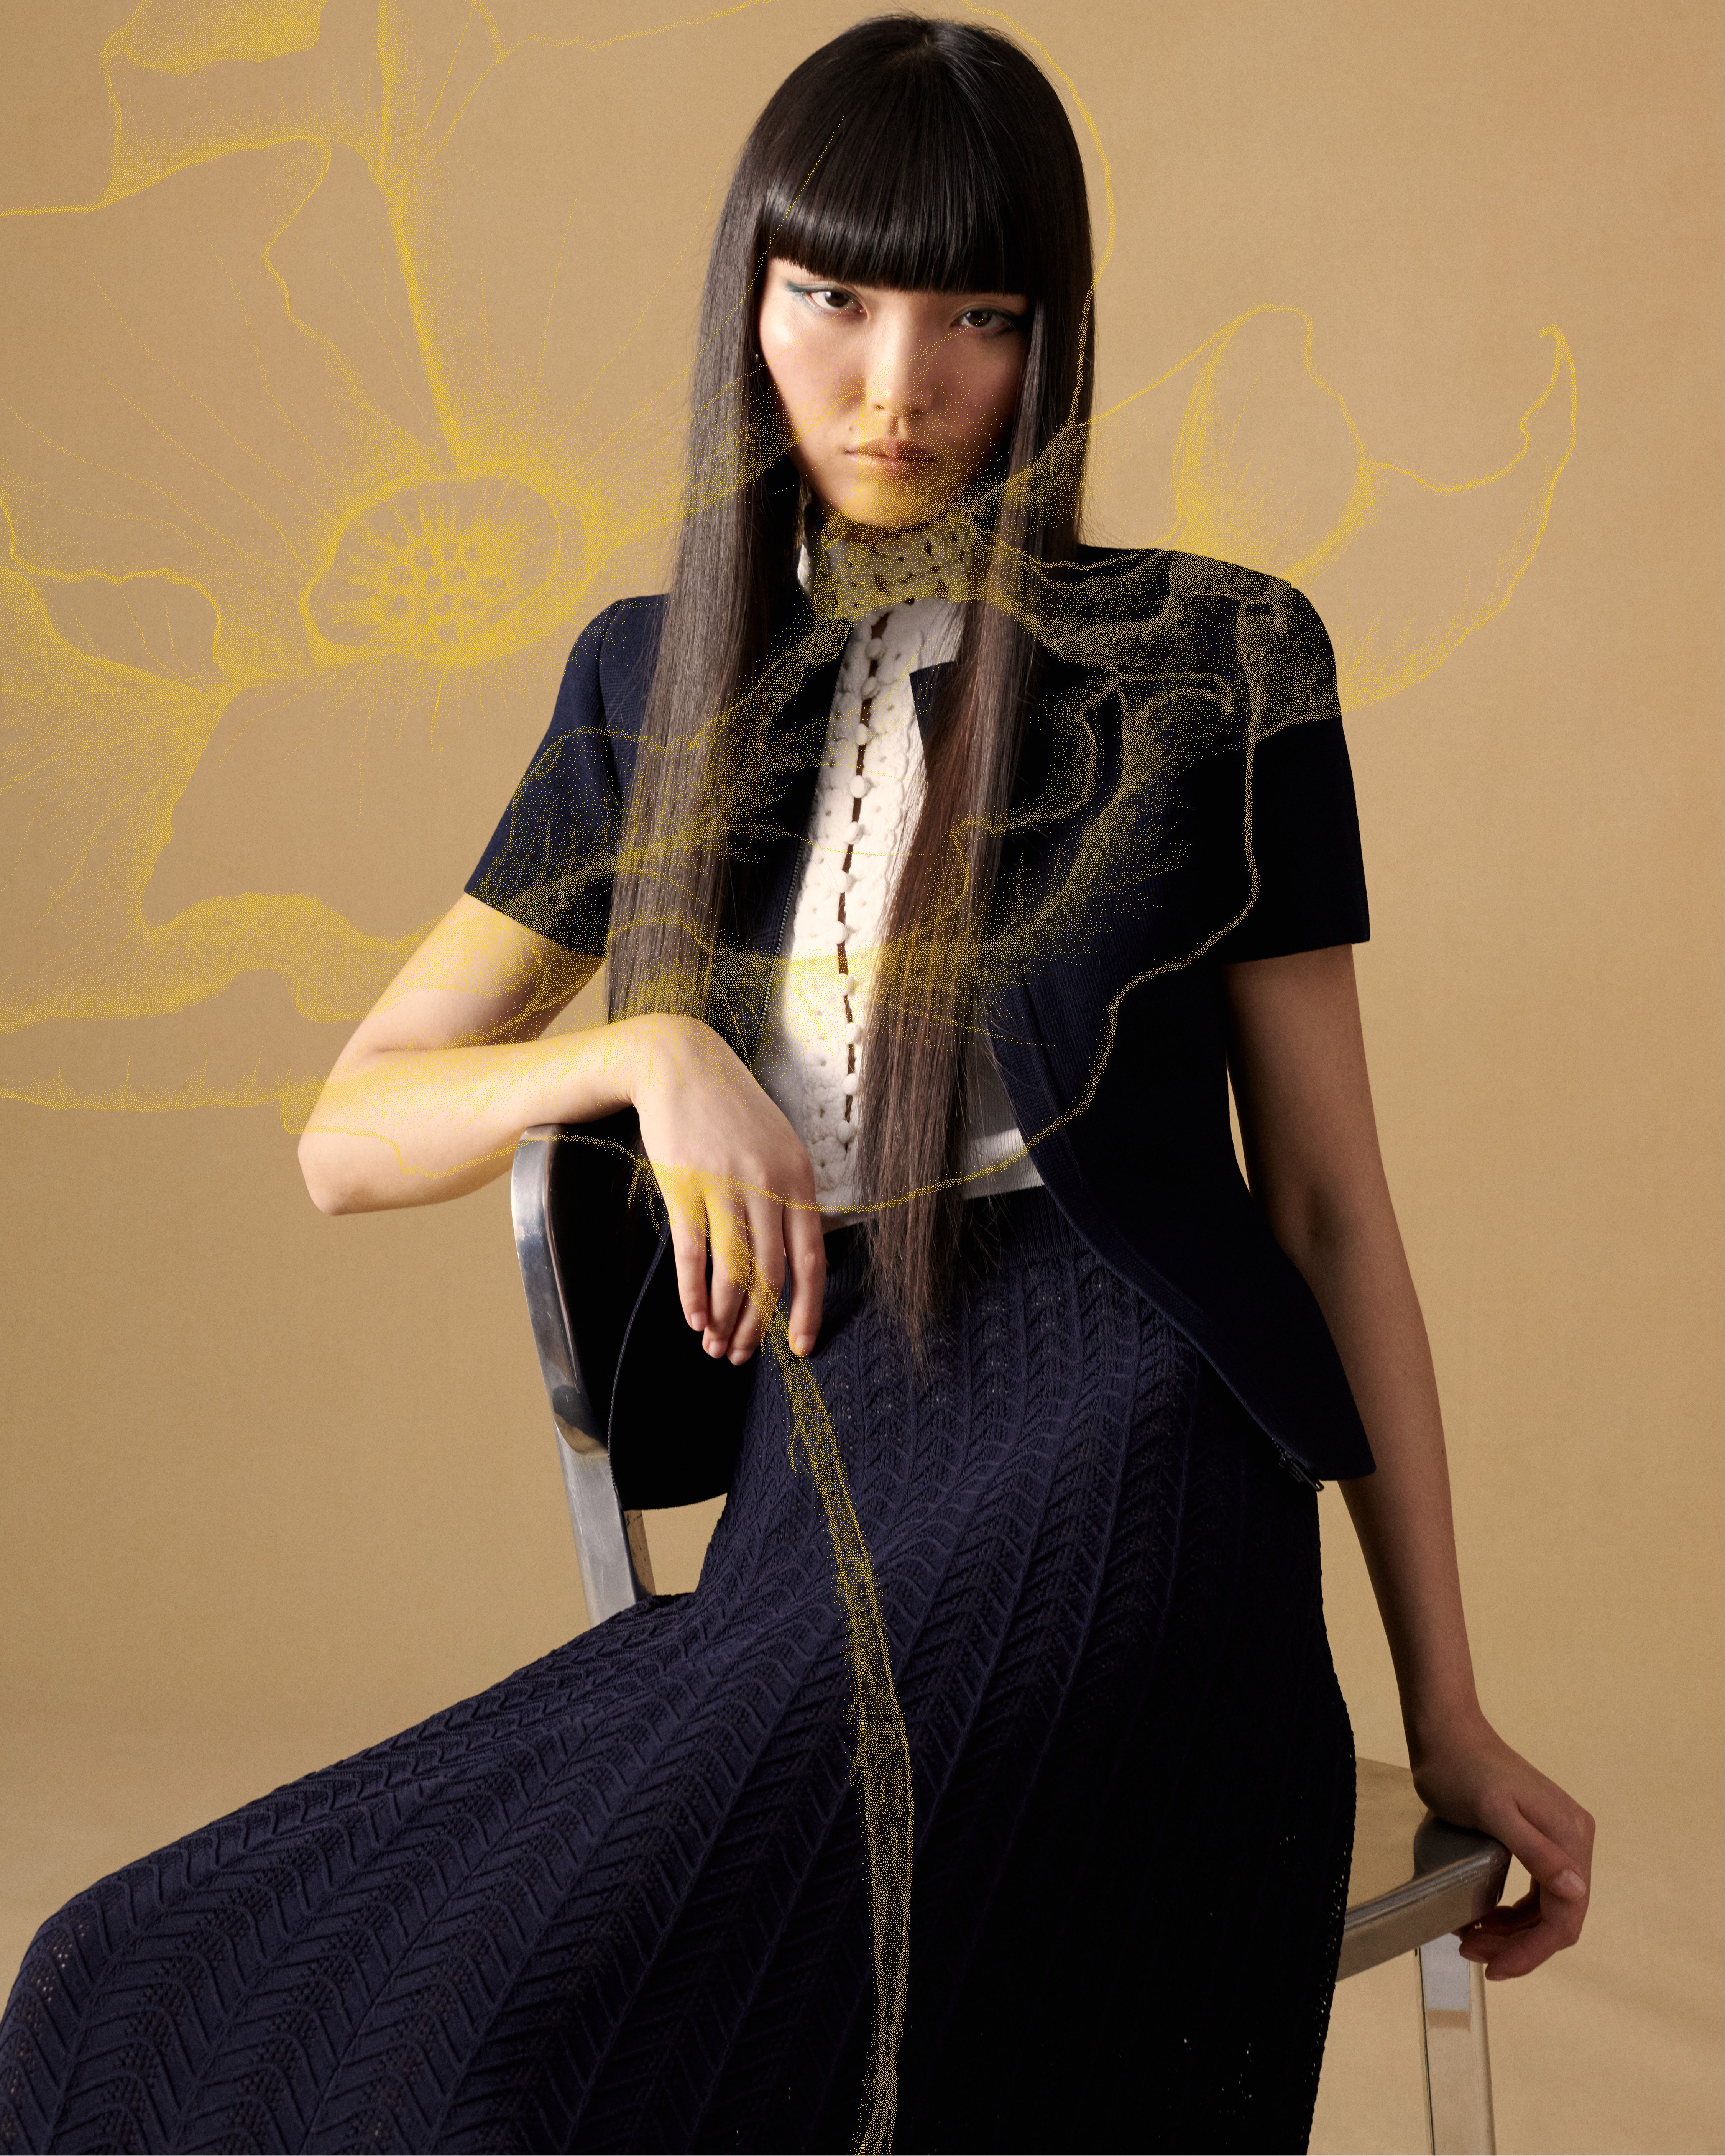 Model sitting in chair wearing navy a Crepe Knit jacket and skirt with a yellow poppy illustration overlaid on top